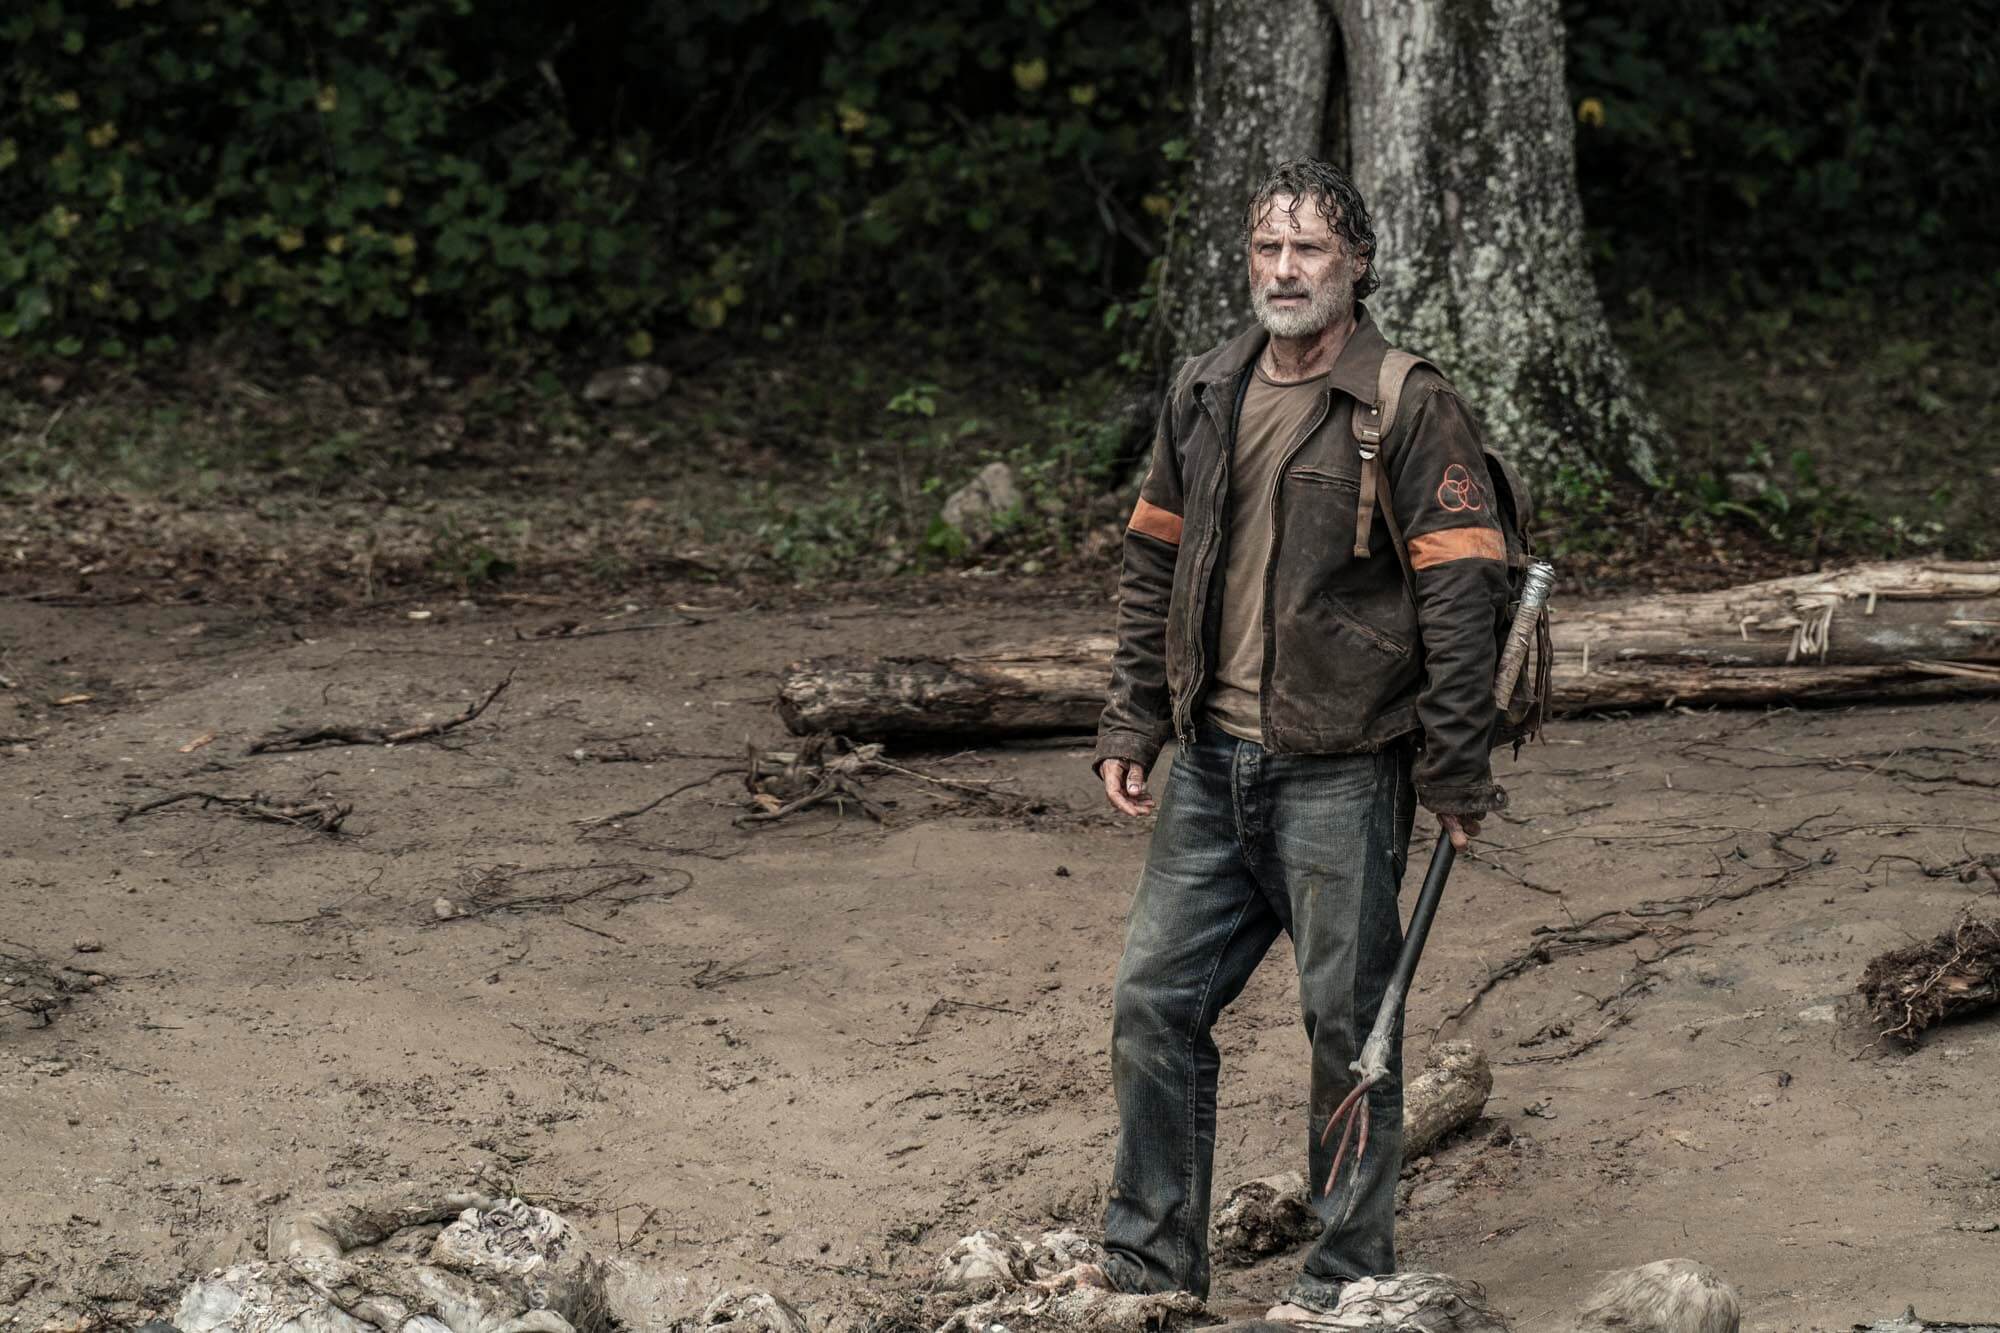 Is Rick Returning to The Walking Dead at the End?